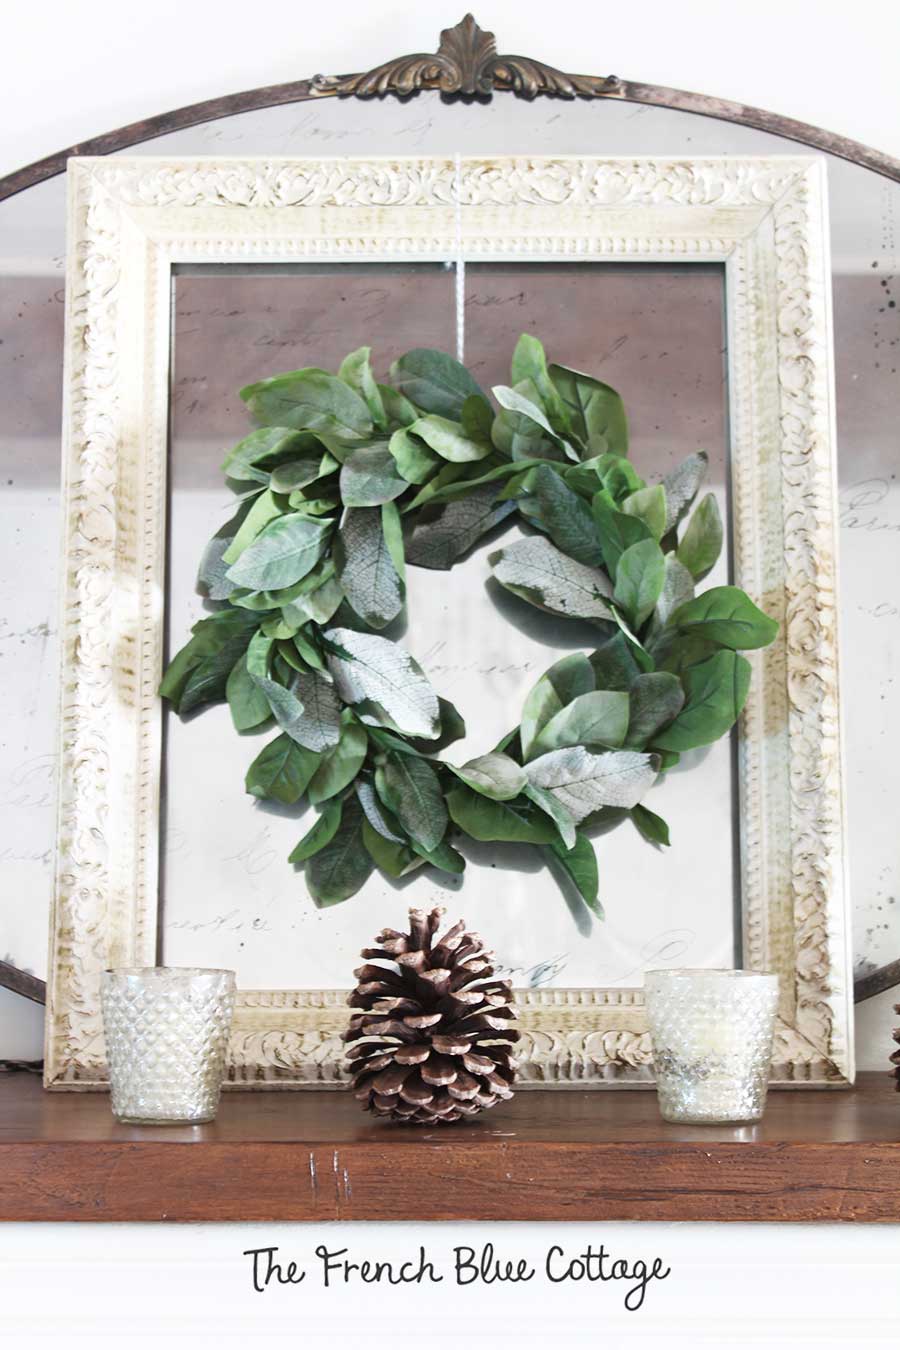 Pinecones on a winter mantel with a layered wreath, frame, and mirror.